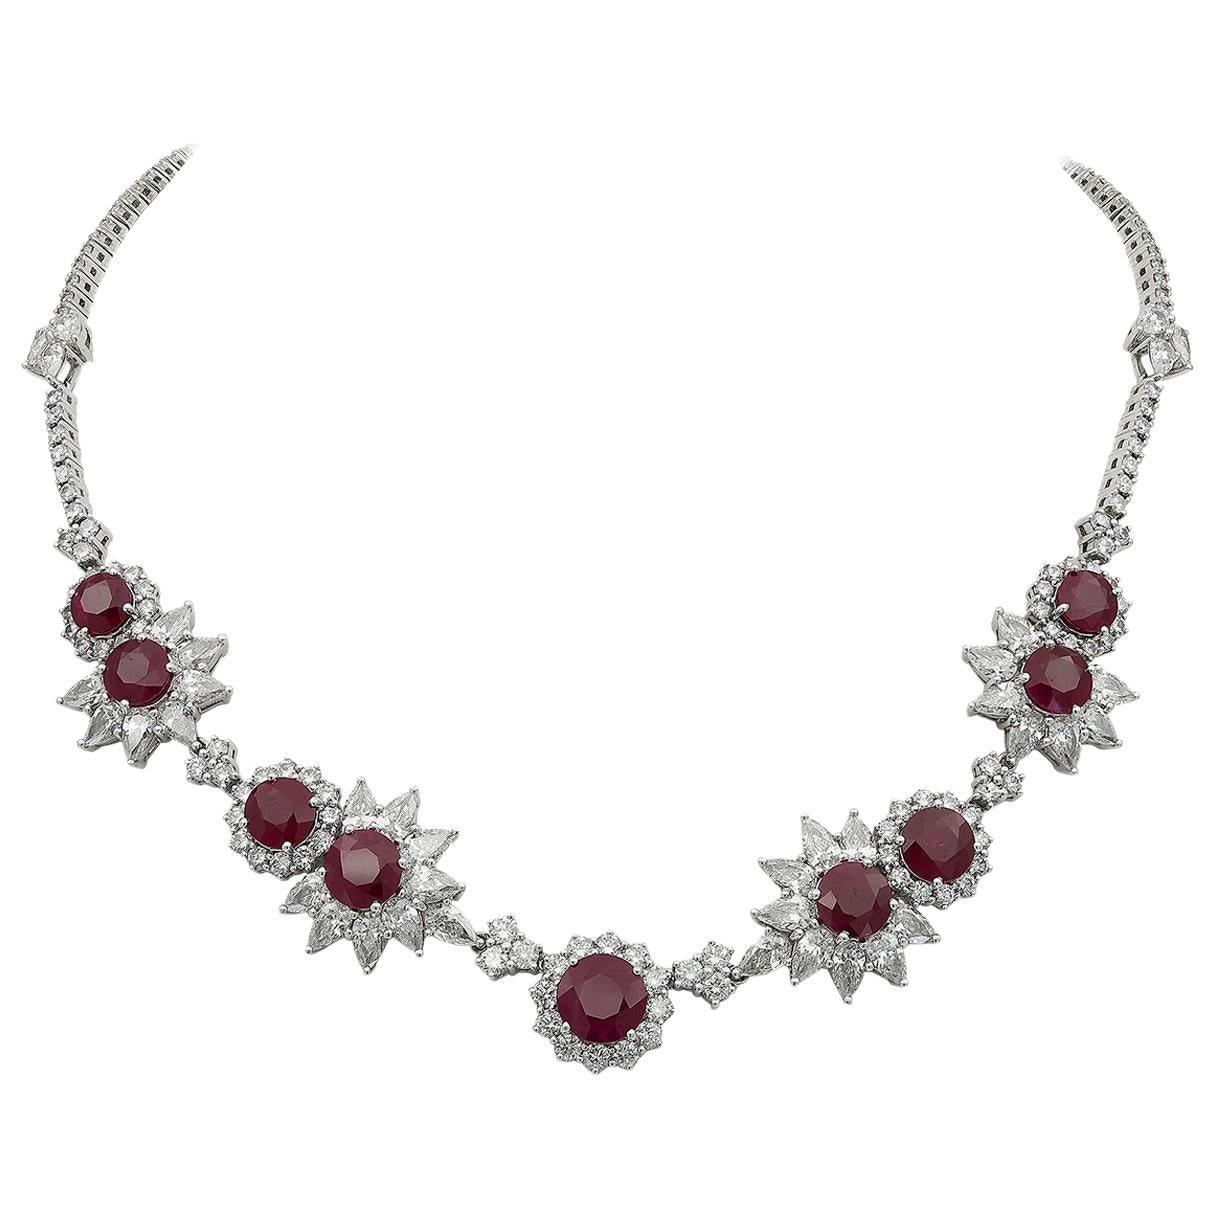 40.89 Carat Round Ruby and Diamond Halo Necklace